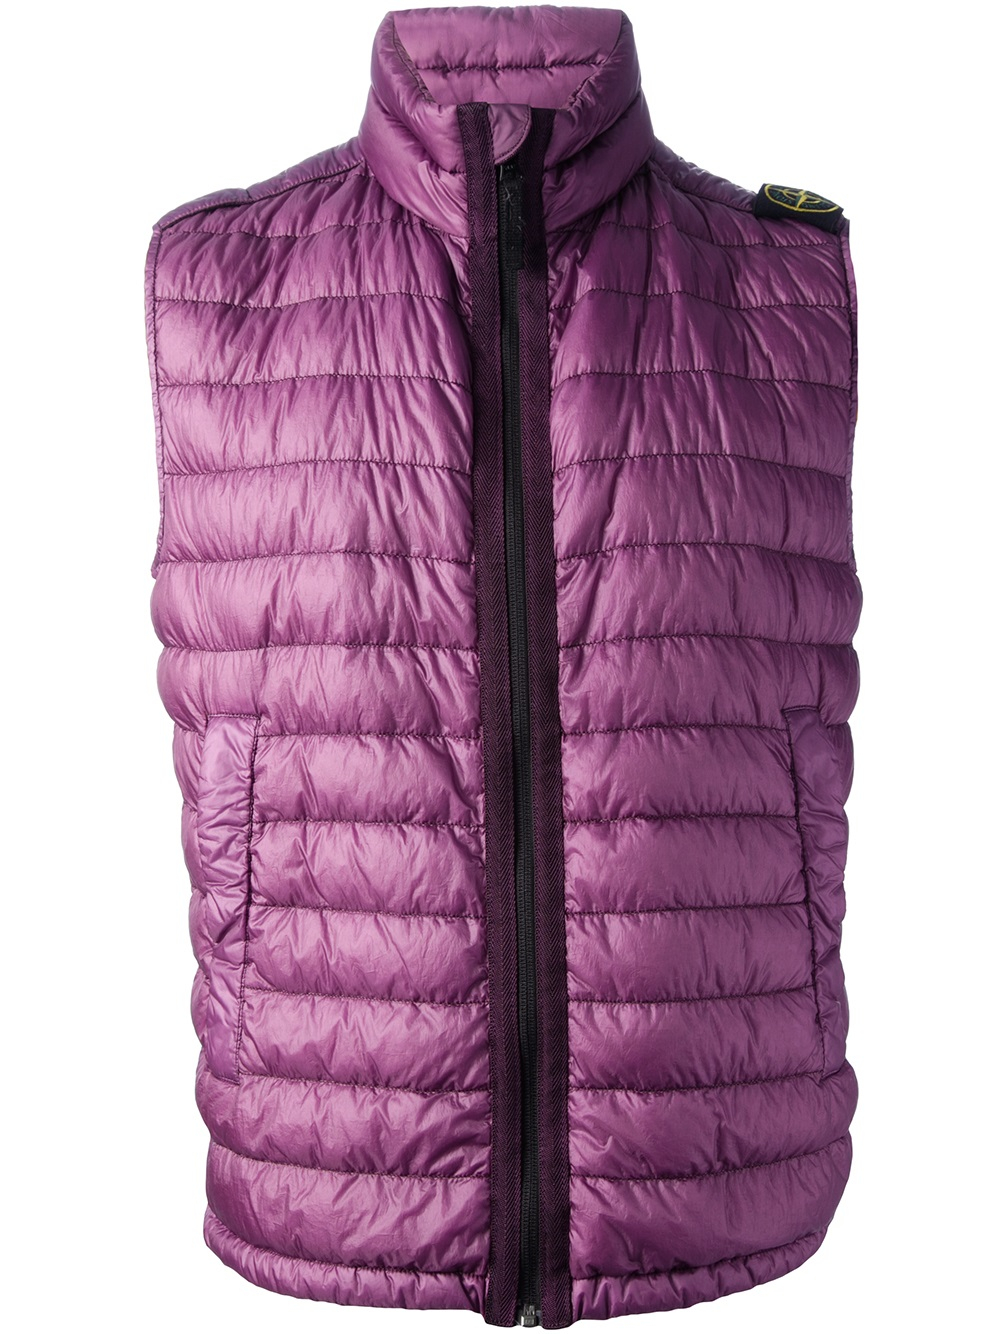 Stone Island Classic Padded Gilet in Pink & Purple (Purple) for Men - Lyst